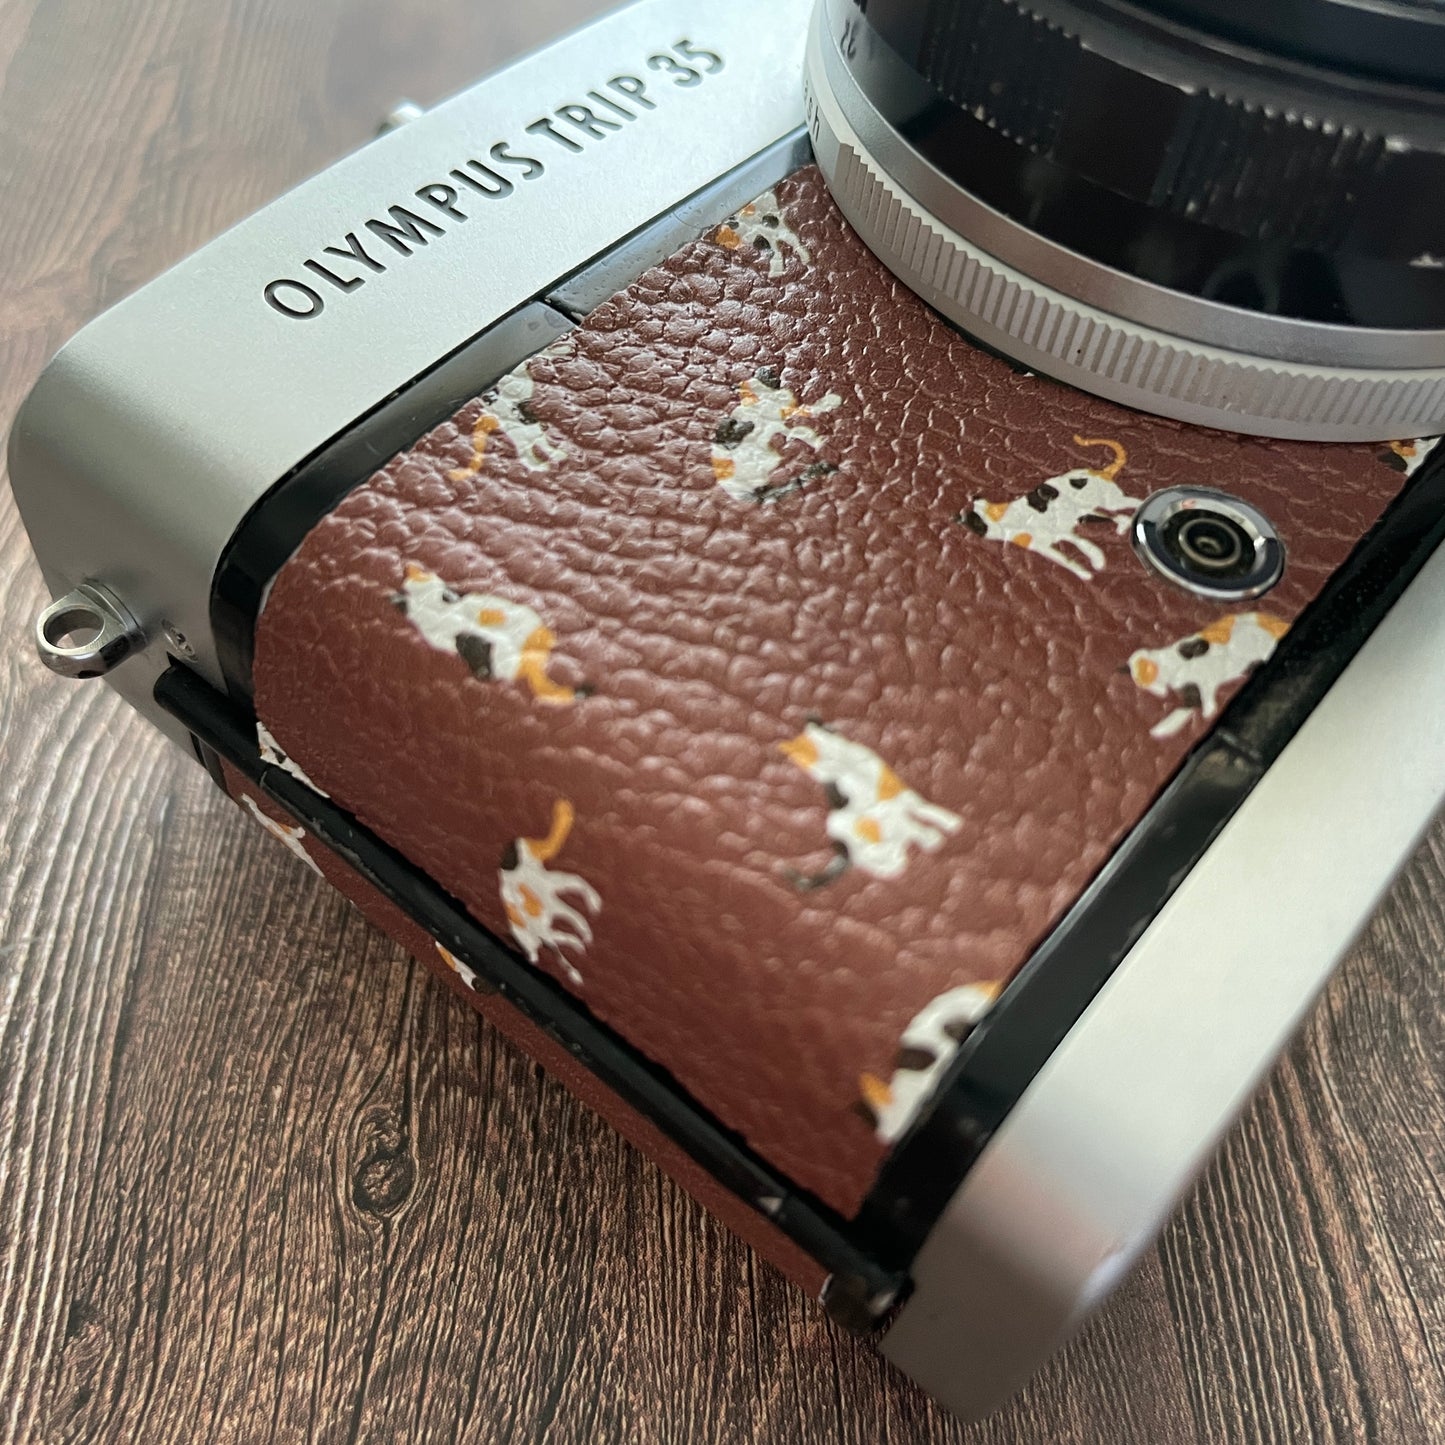 Olympus  TRIP35  with cat pattern brown leather